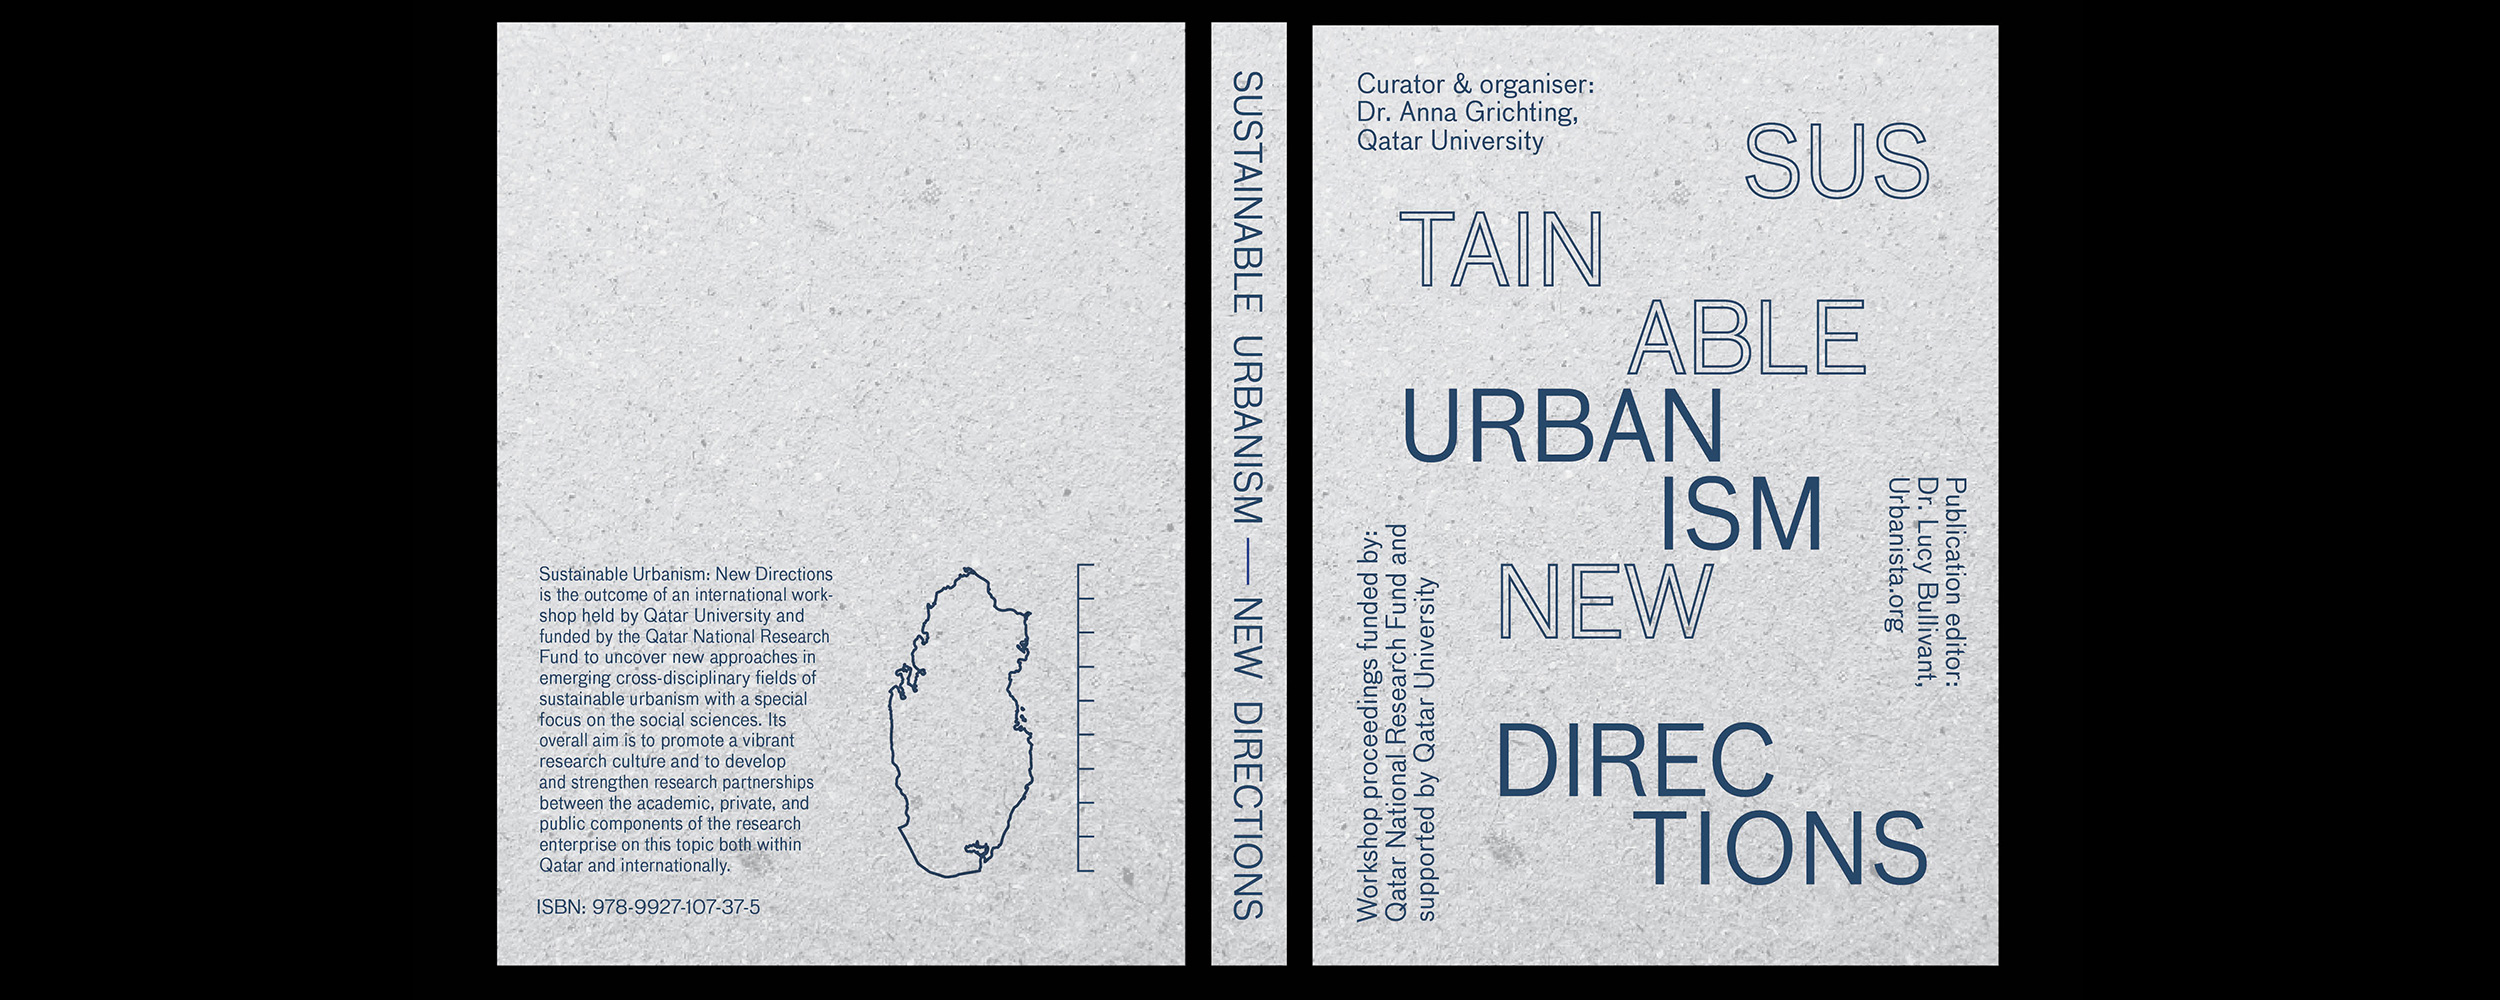 Sustainable Urbanism - New Directions, limited edition printed publication, proceedings of the international workshop of the same name funded by the Qatar National Research Fund and supported by Qatar University. Curator & organiser: Dr. Anna Grichting. Publication editor: Dr. Lucy Bullivant, Urbanista.org. Book designed by Kirstin Helgadóttir, 2018, Qatar University. Image © Kirstin Helgadóttir.